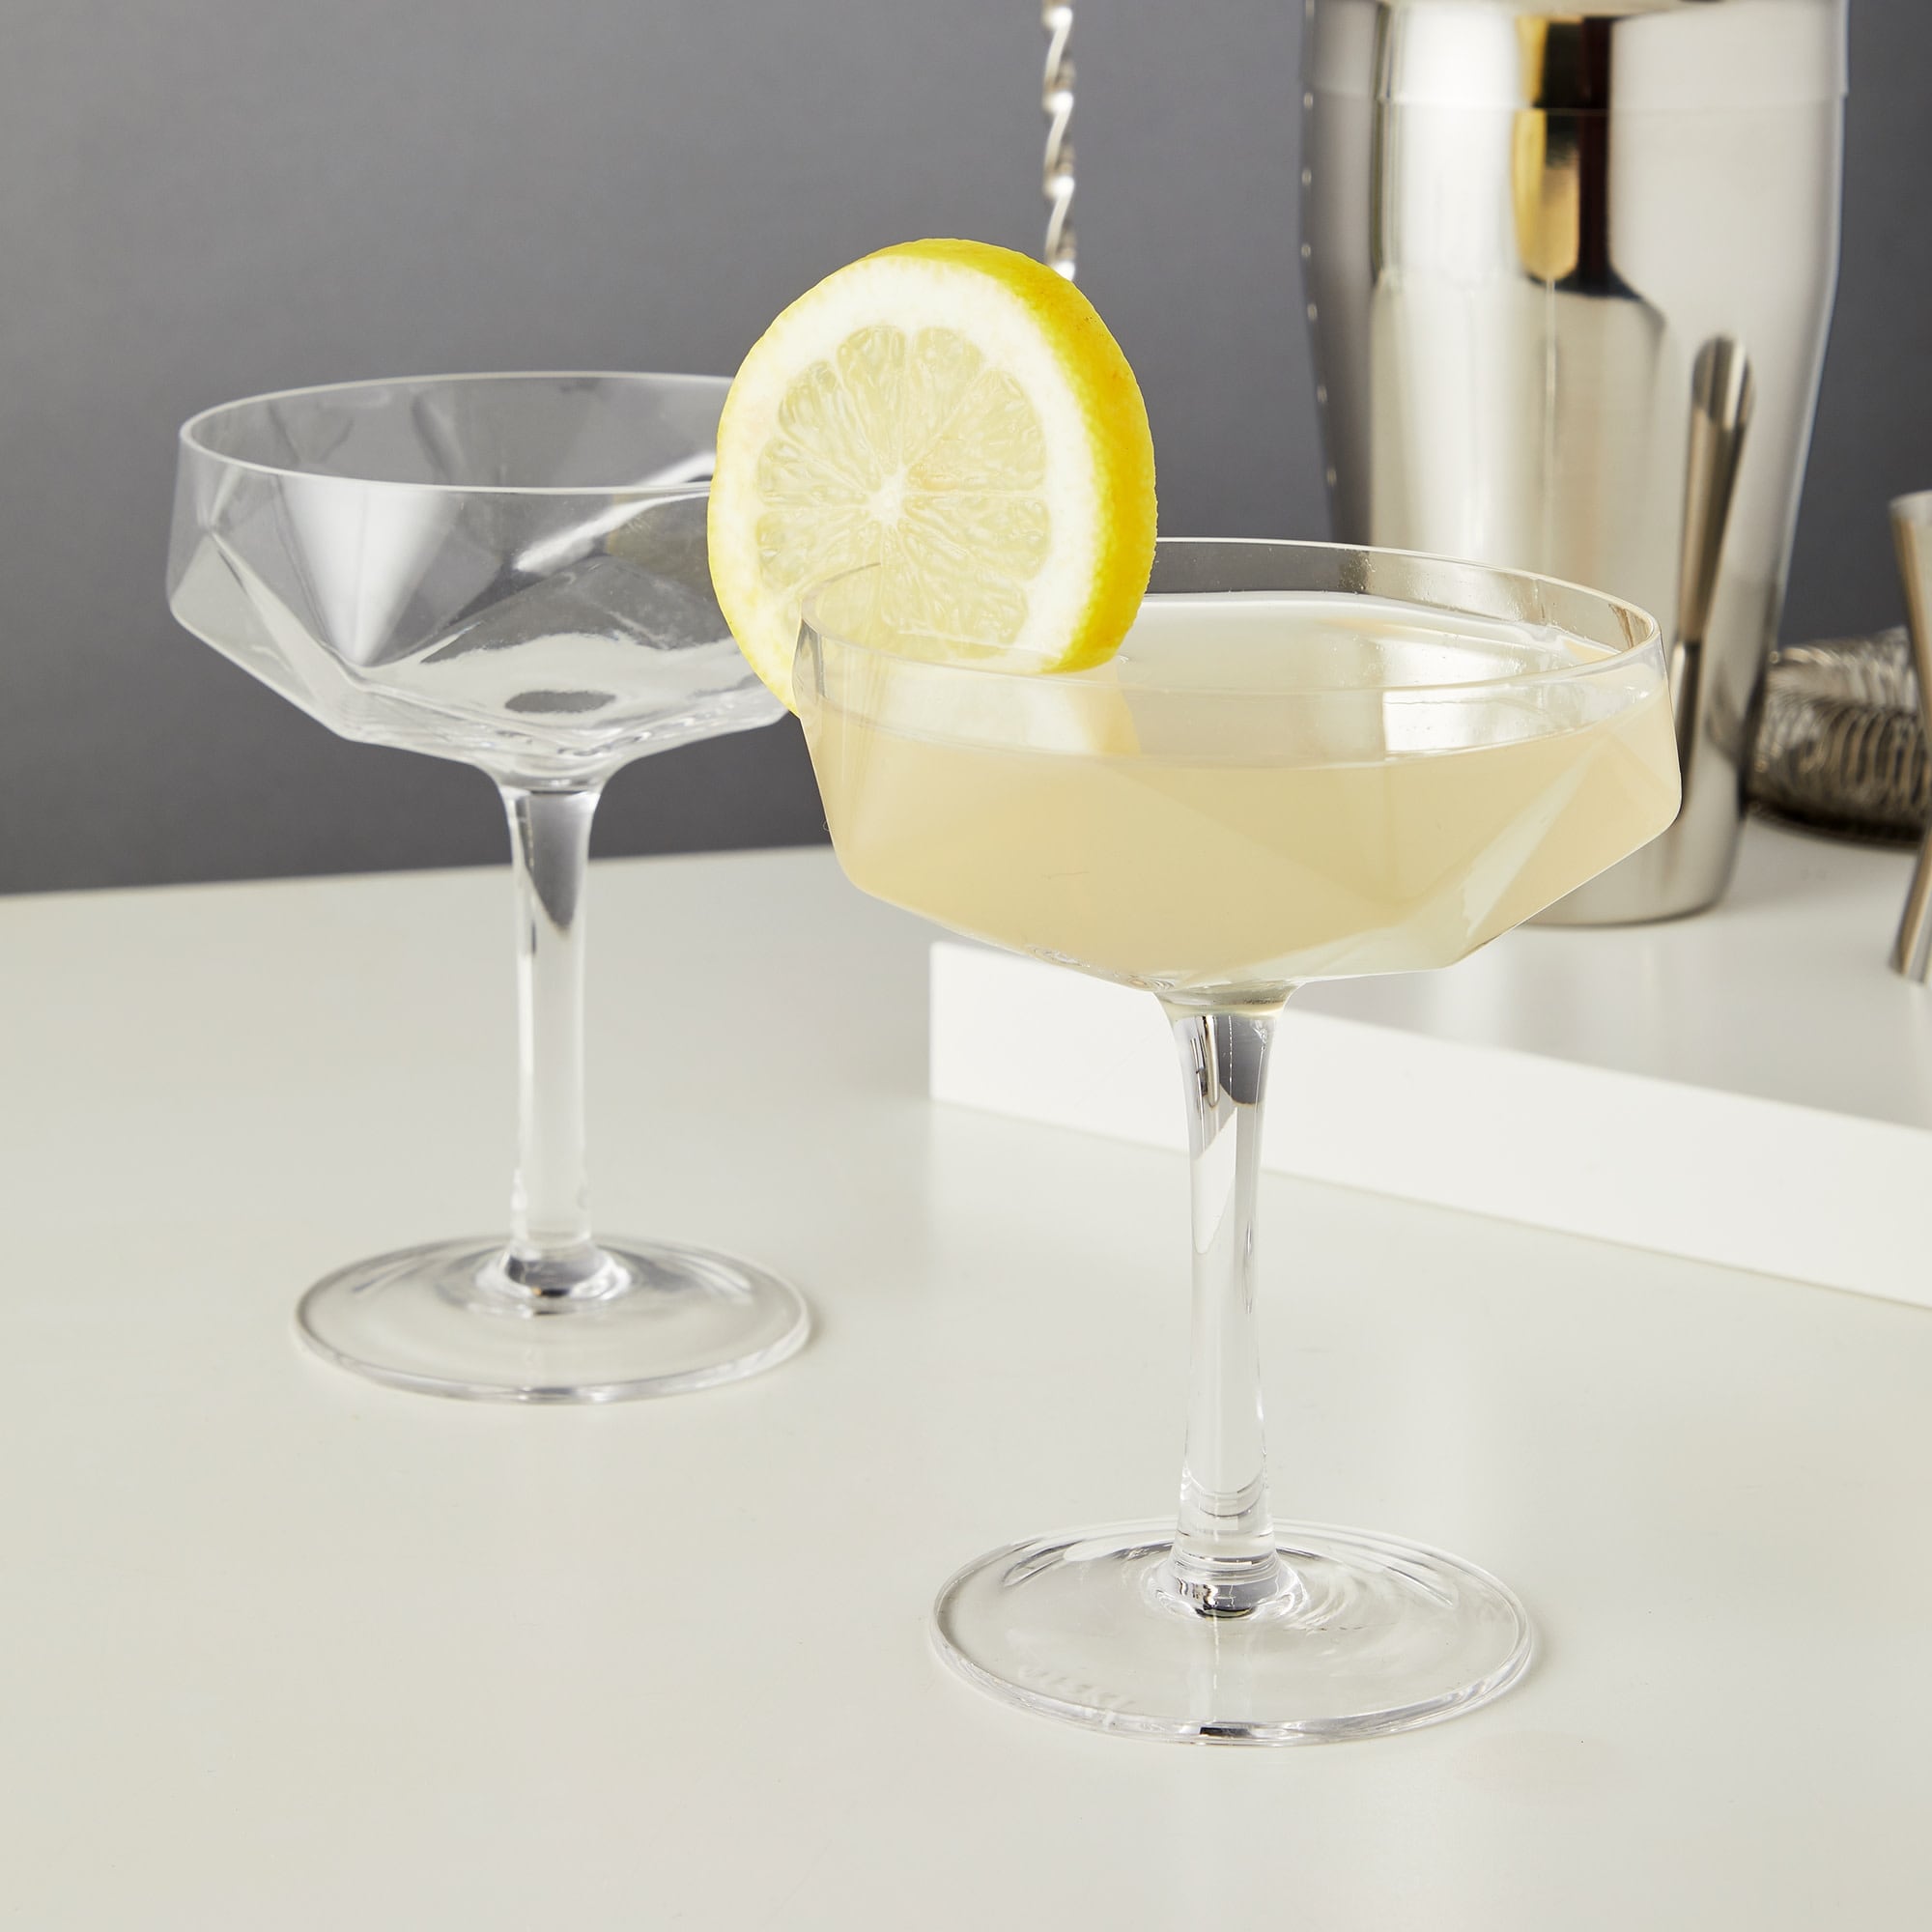 Faceted Crystal Wine Glasses by Viski - The Best Wine Store